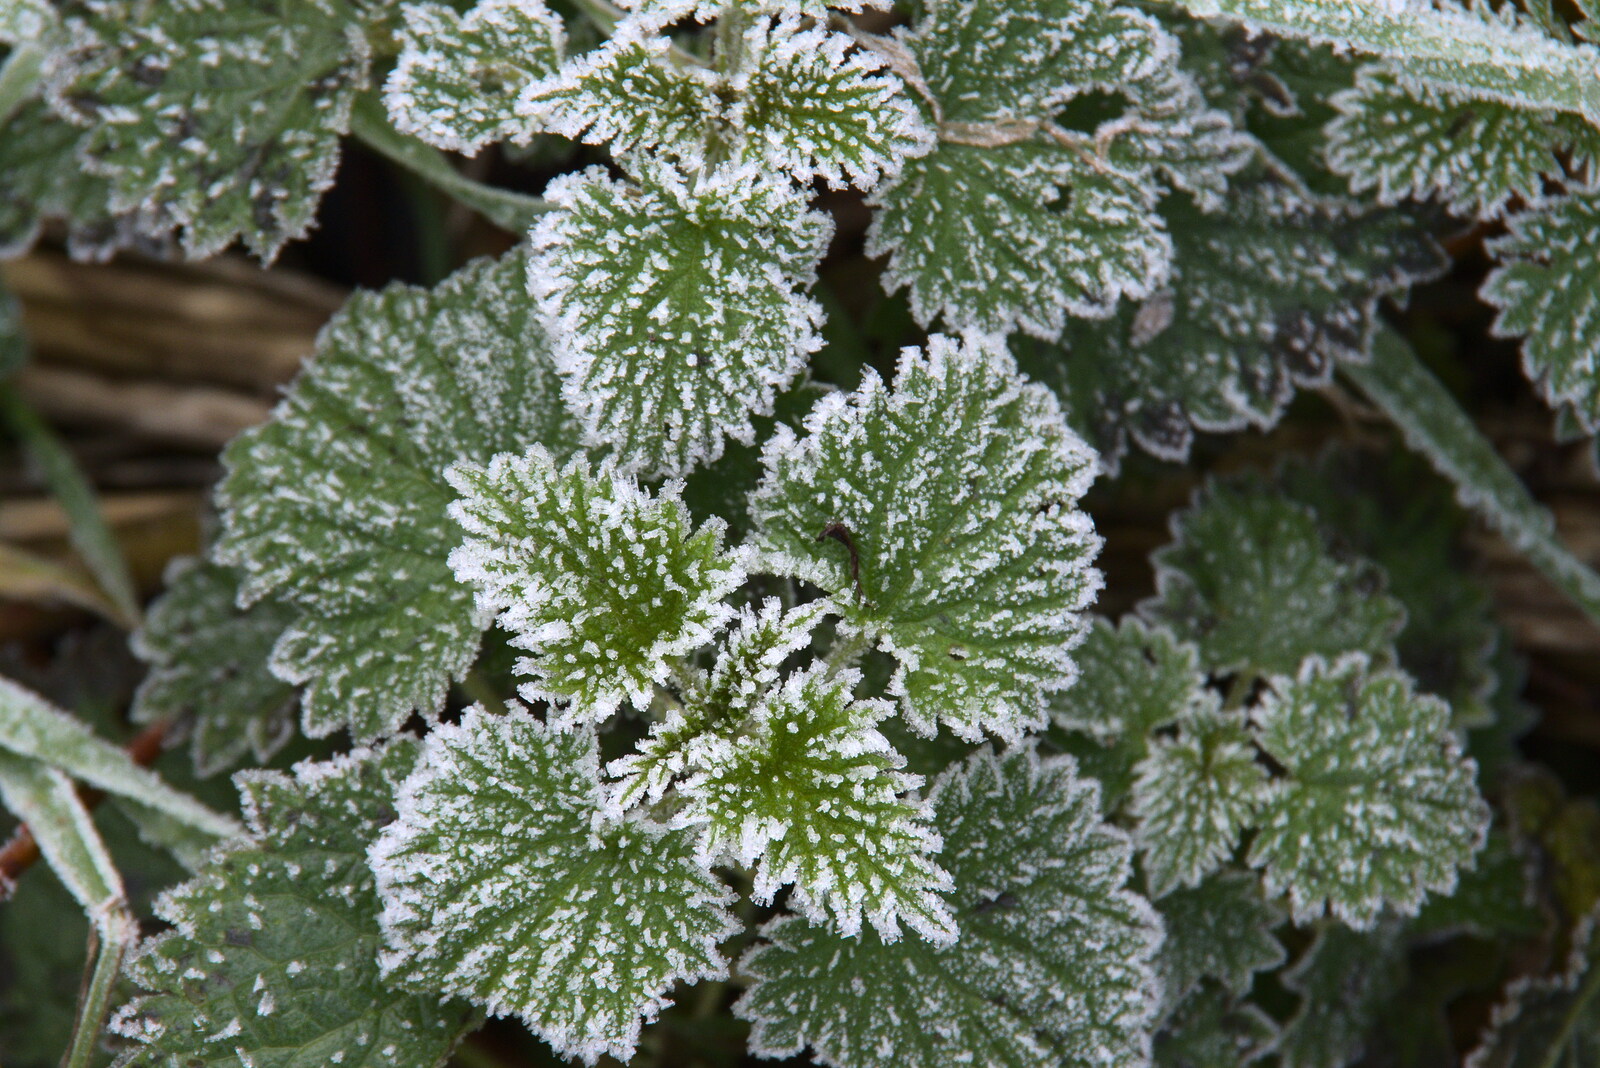 Even nettles look nice with some frost on from A Virtual New Year's Eve, Brome, Suffolk - 31st December 2020